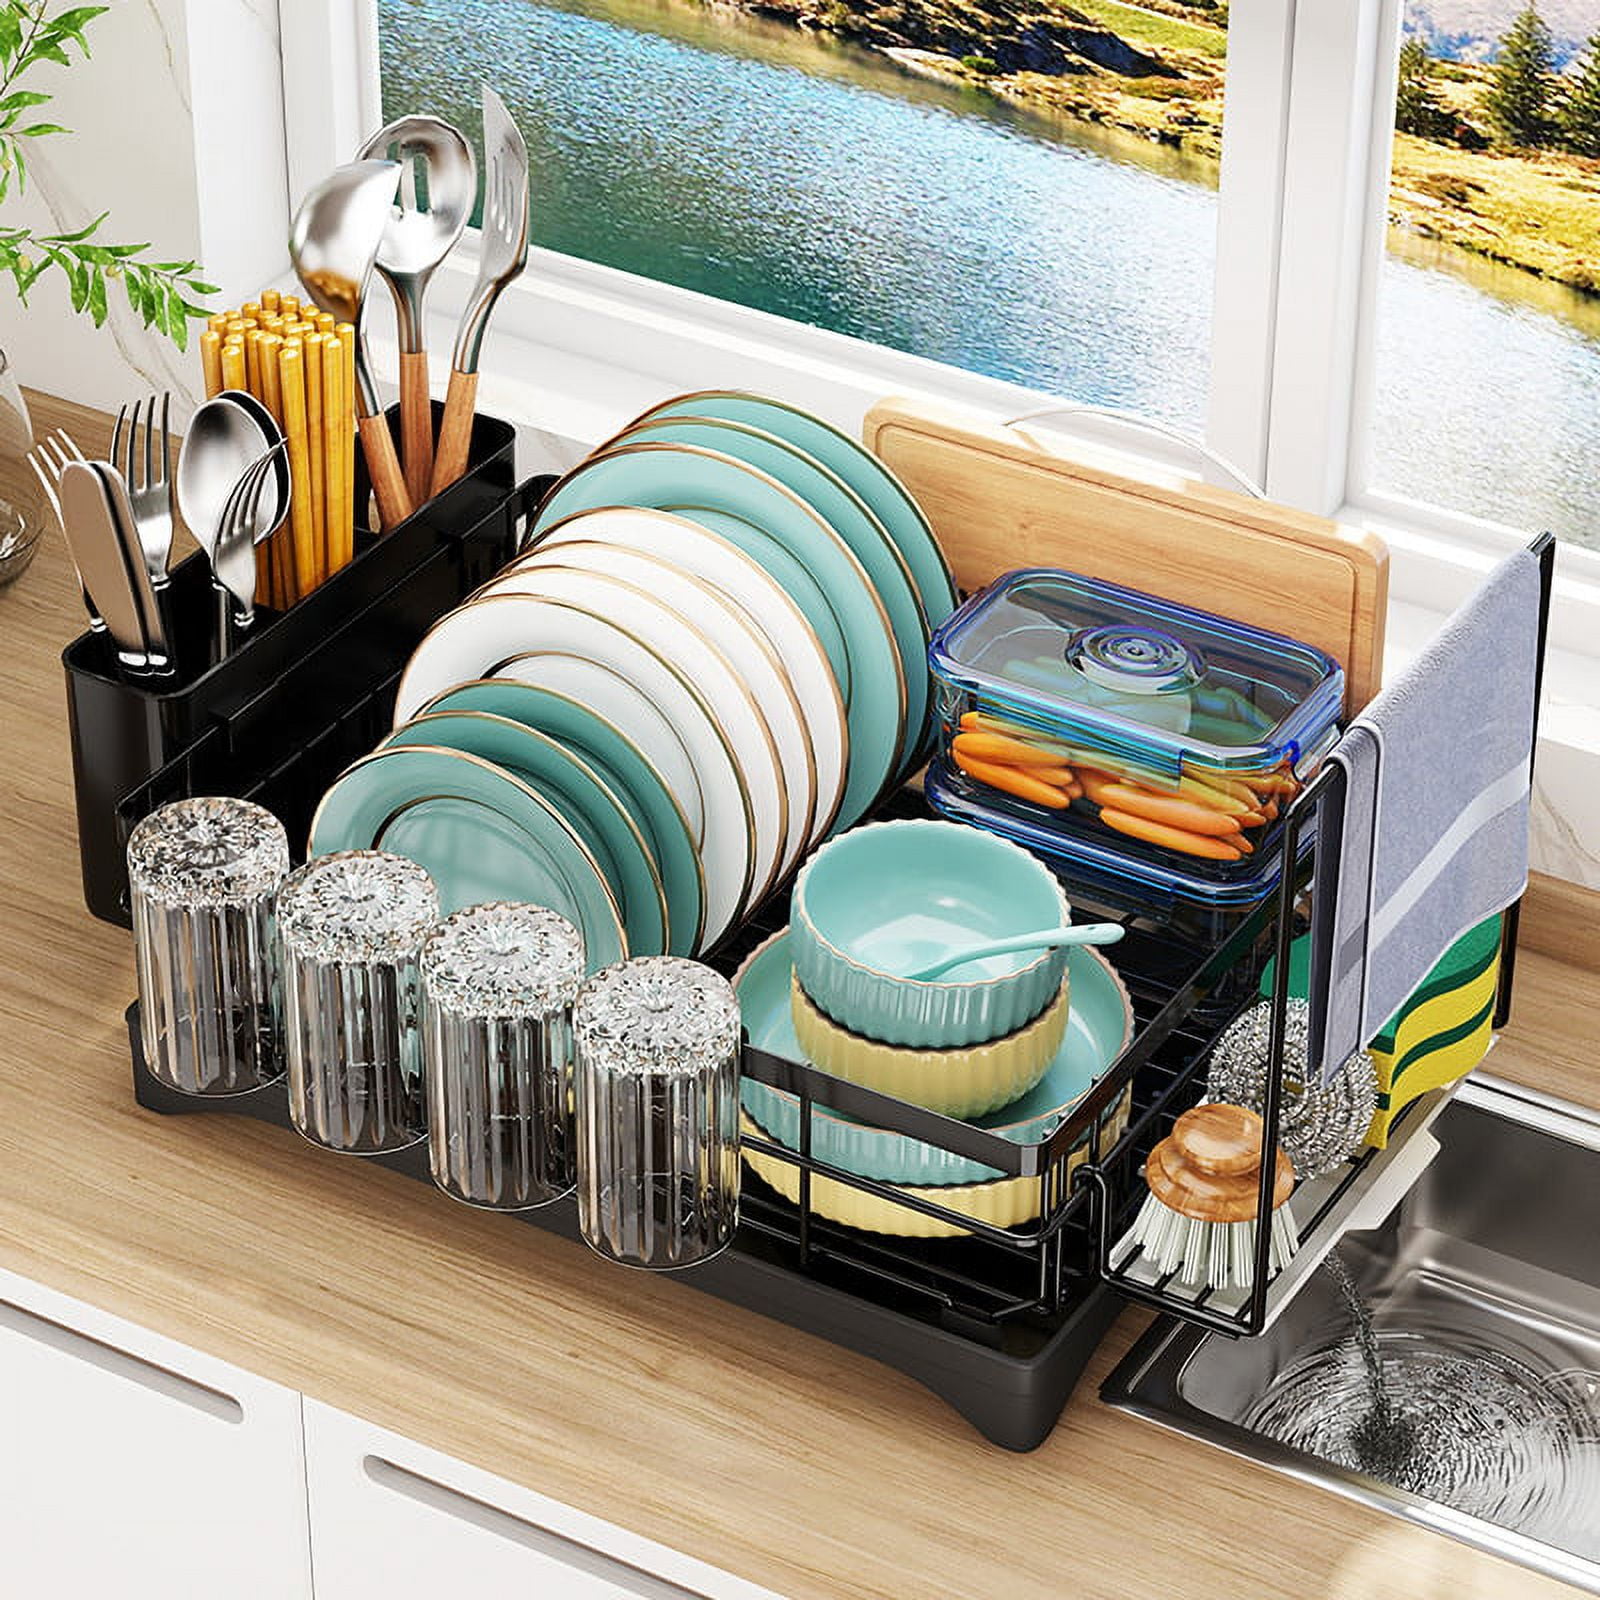 HM&DX Kitchen Counter Dish Drying Rack,Stainless Steel Dishes Drainer with  Cup Holder Utensil Holder,Space-Saving Dish Rack,Removable Plastic Drainer